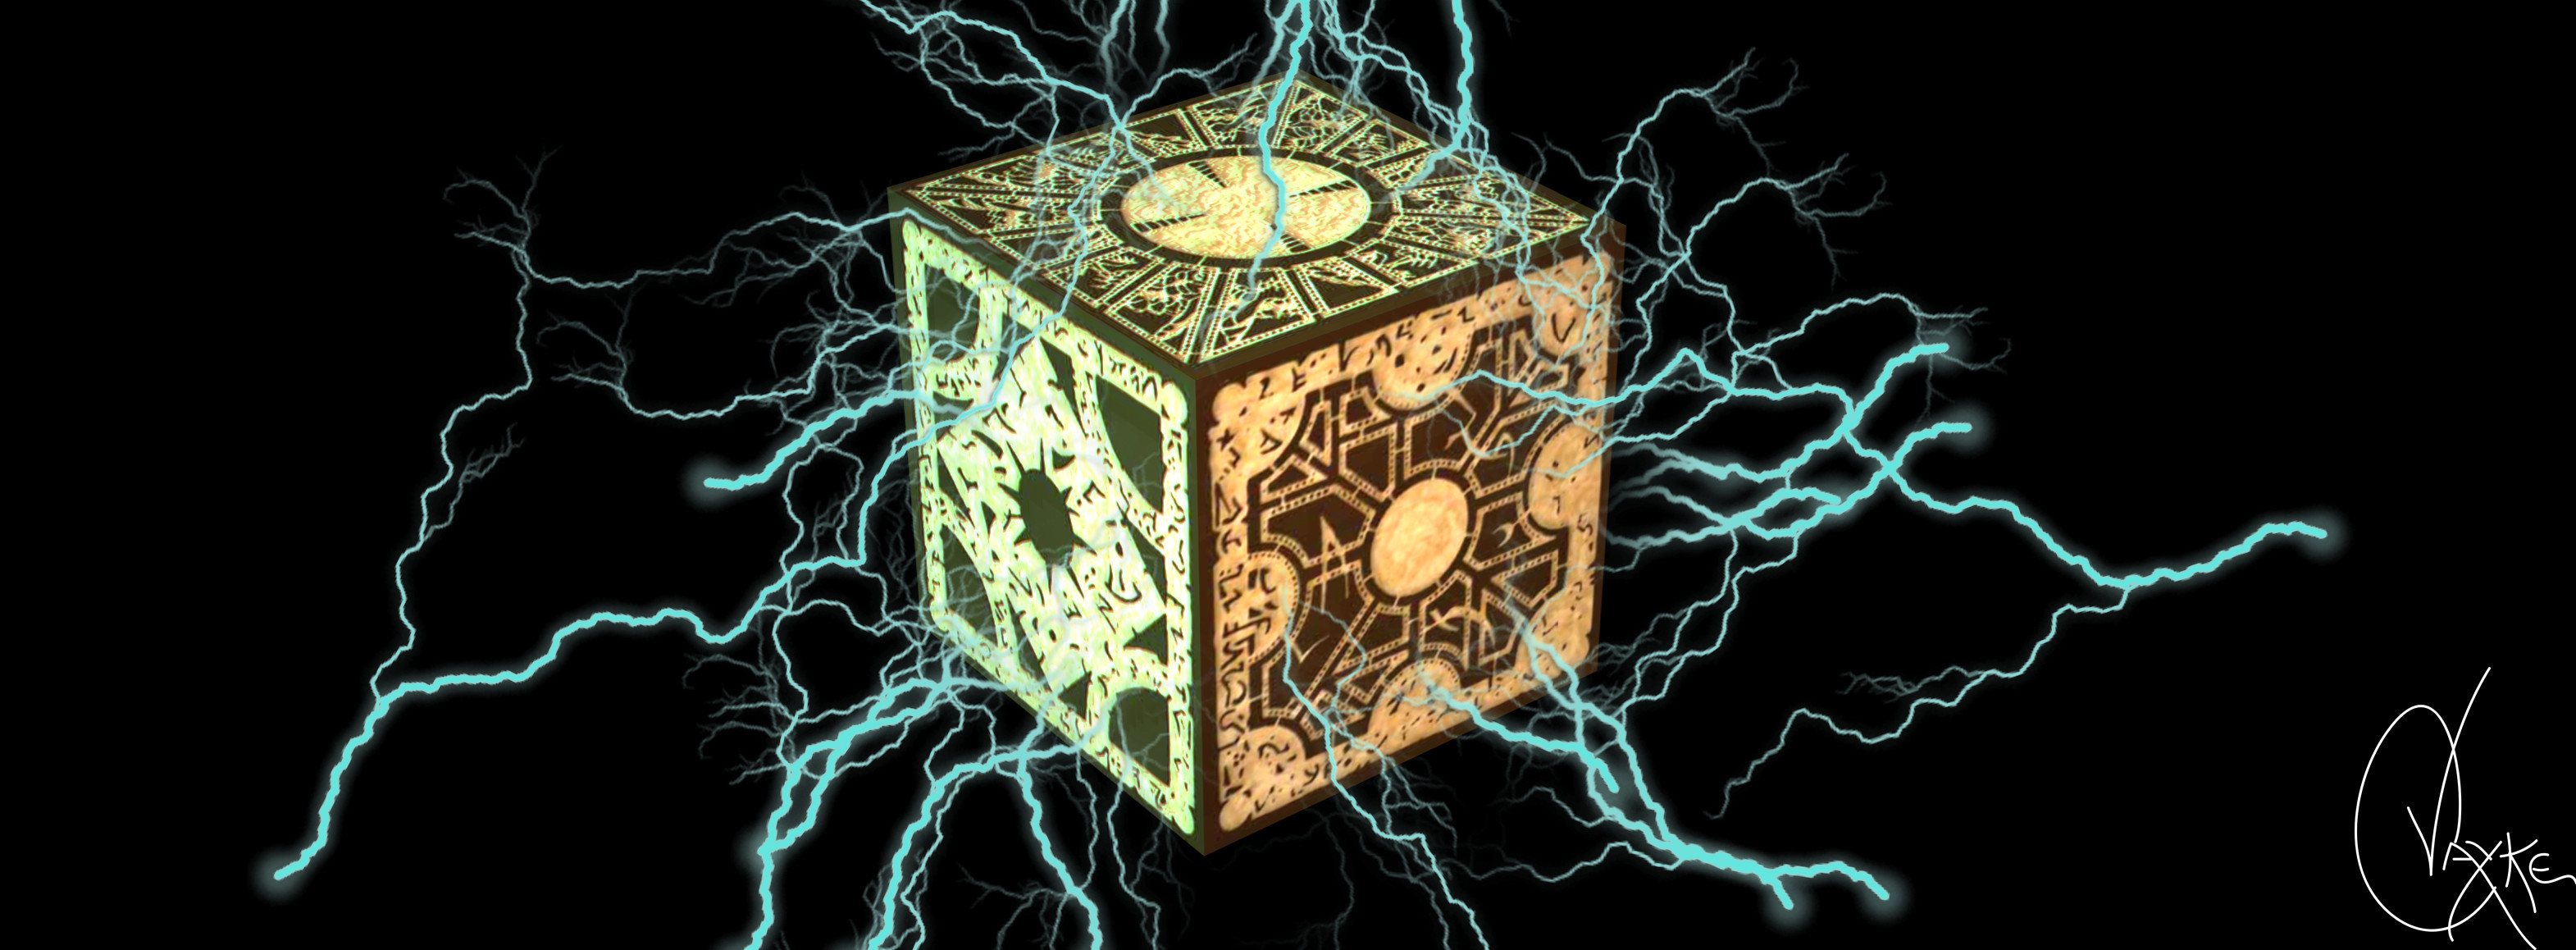 3141x1158 ... Hellraiser Puzzle Box Wallpaper keywords and pictures ...